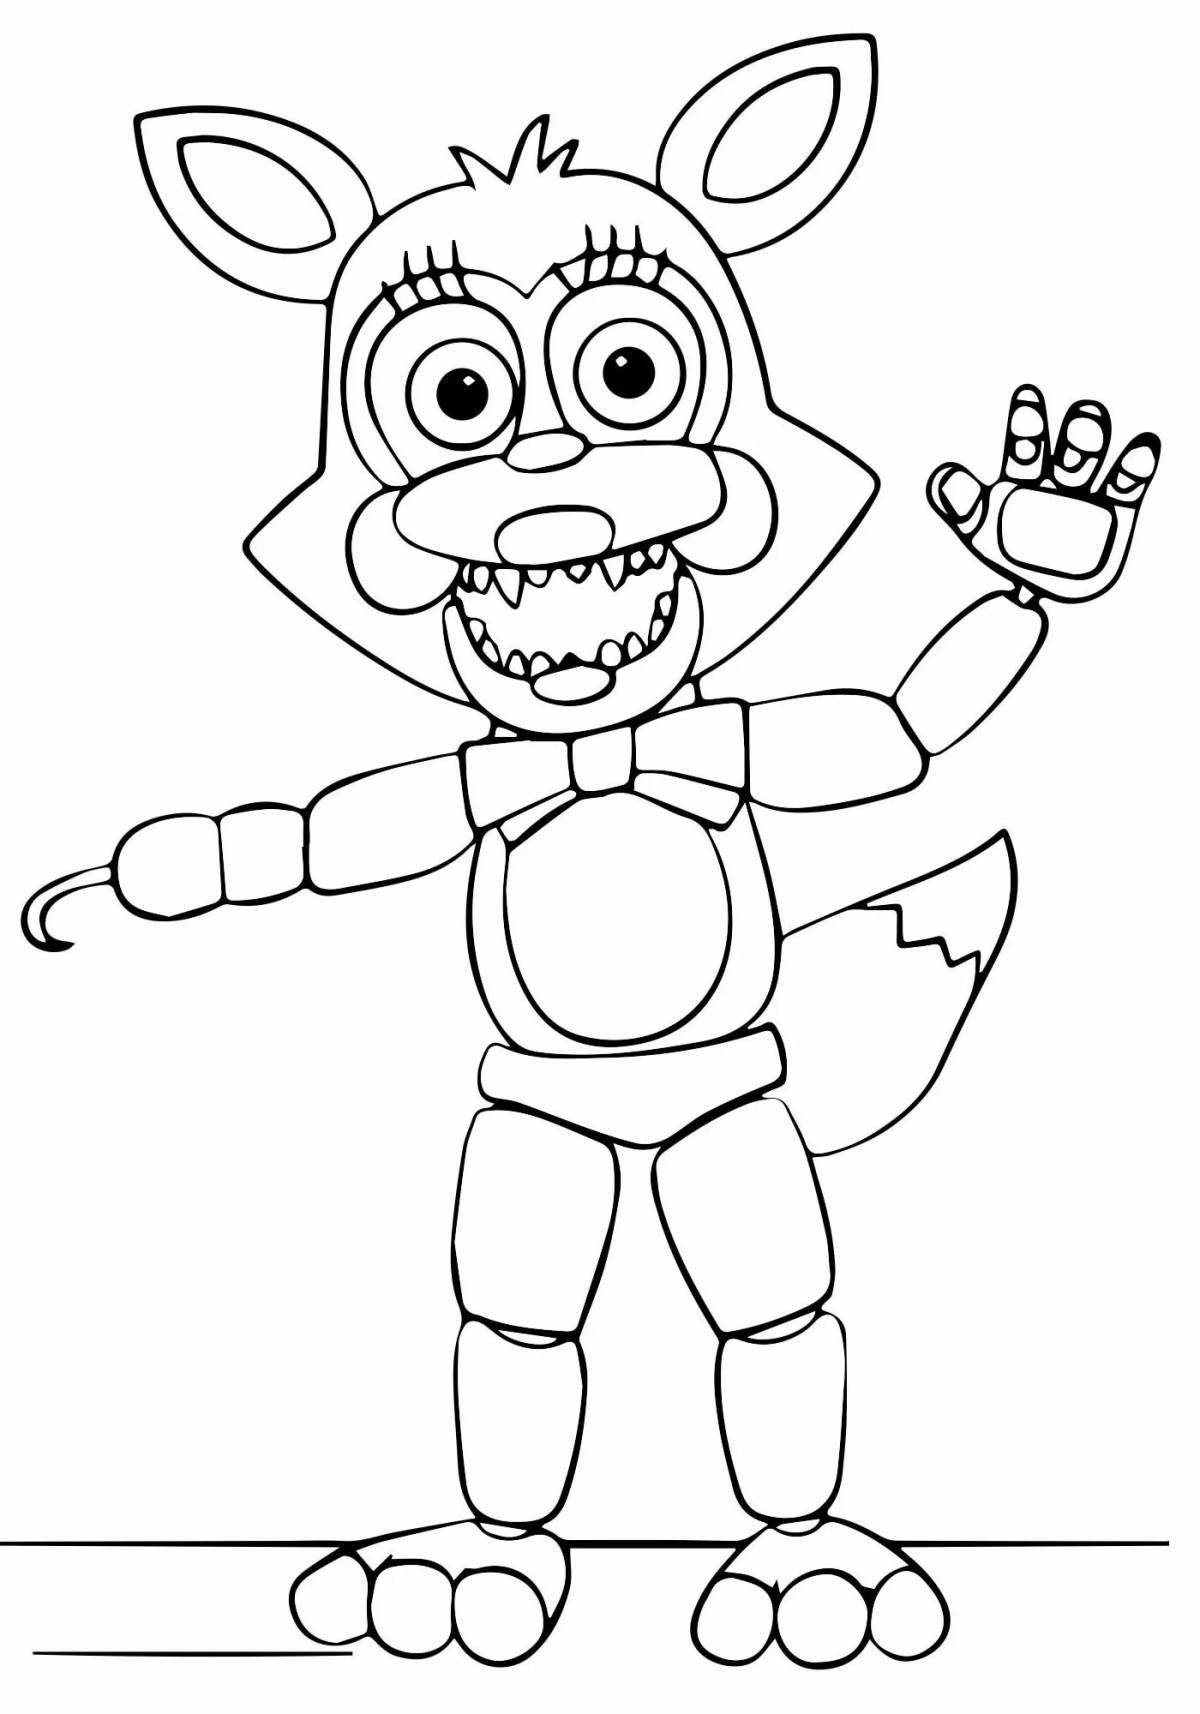 Animatronic seal coloring page